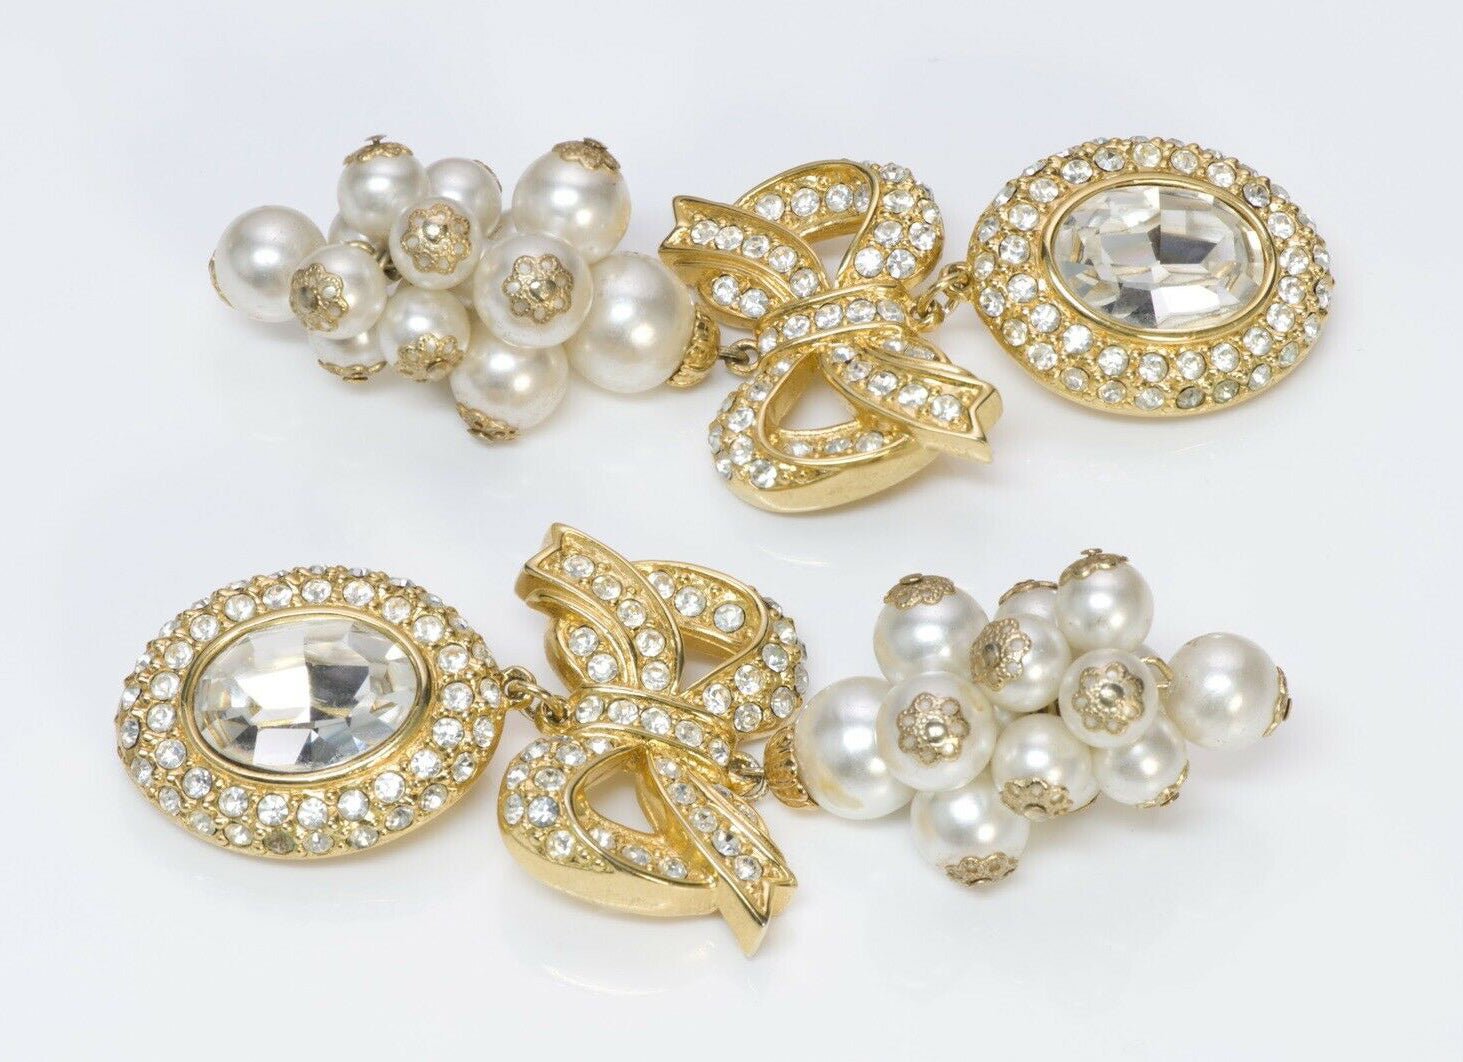 VALENTINO Garavani Couture 1980’s Long Crystal Pearl Bow Earrings